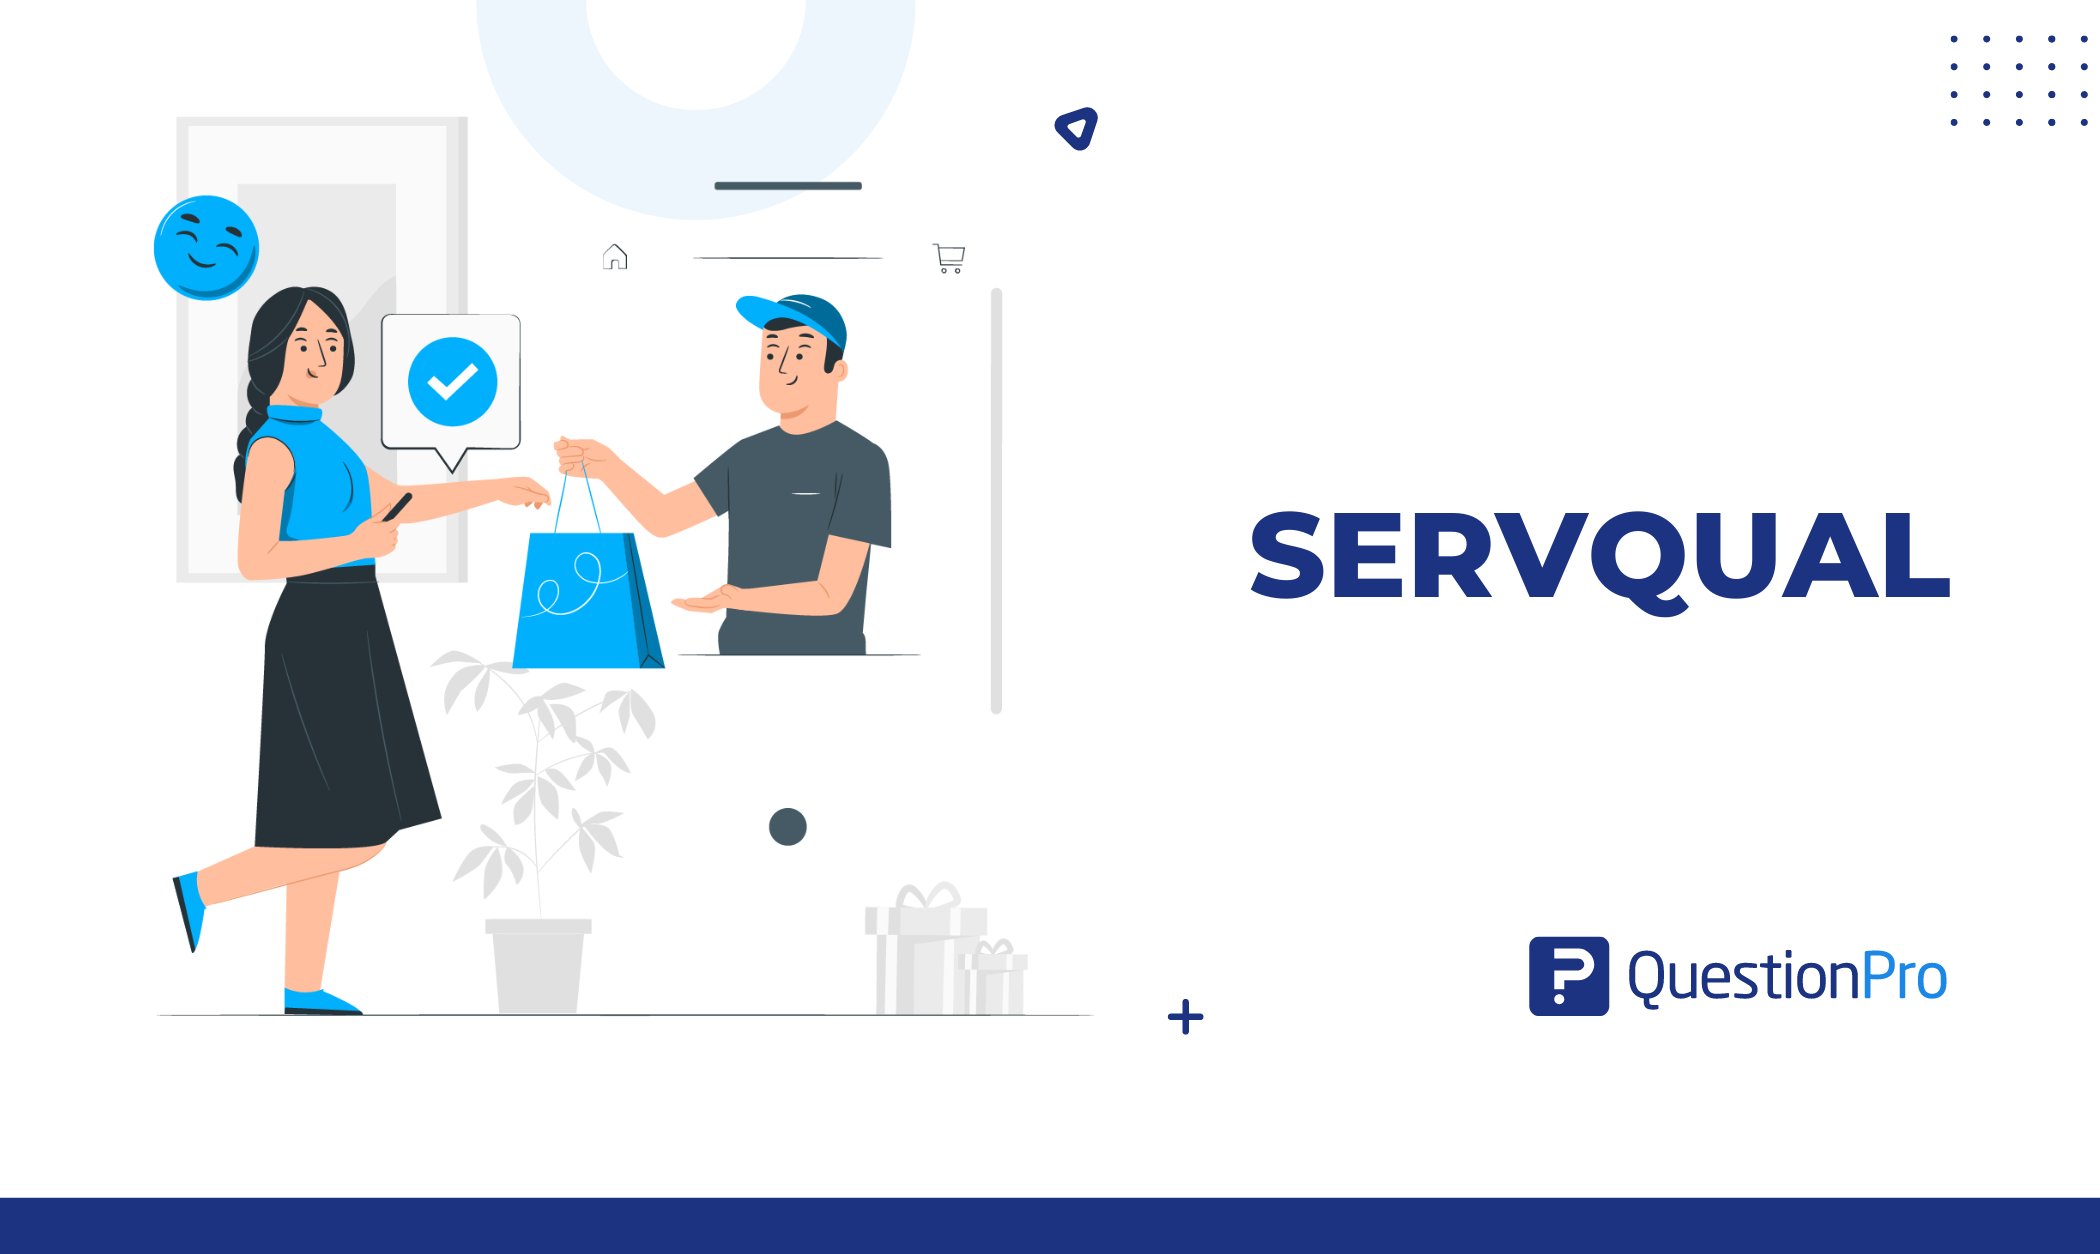 Unleash Servqual power: Recognize this model for evaluating service excellence and providing excellent customer experiences. Learn how now!